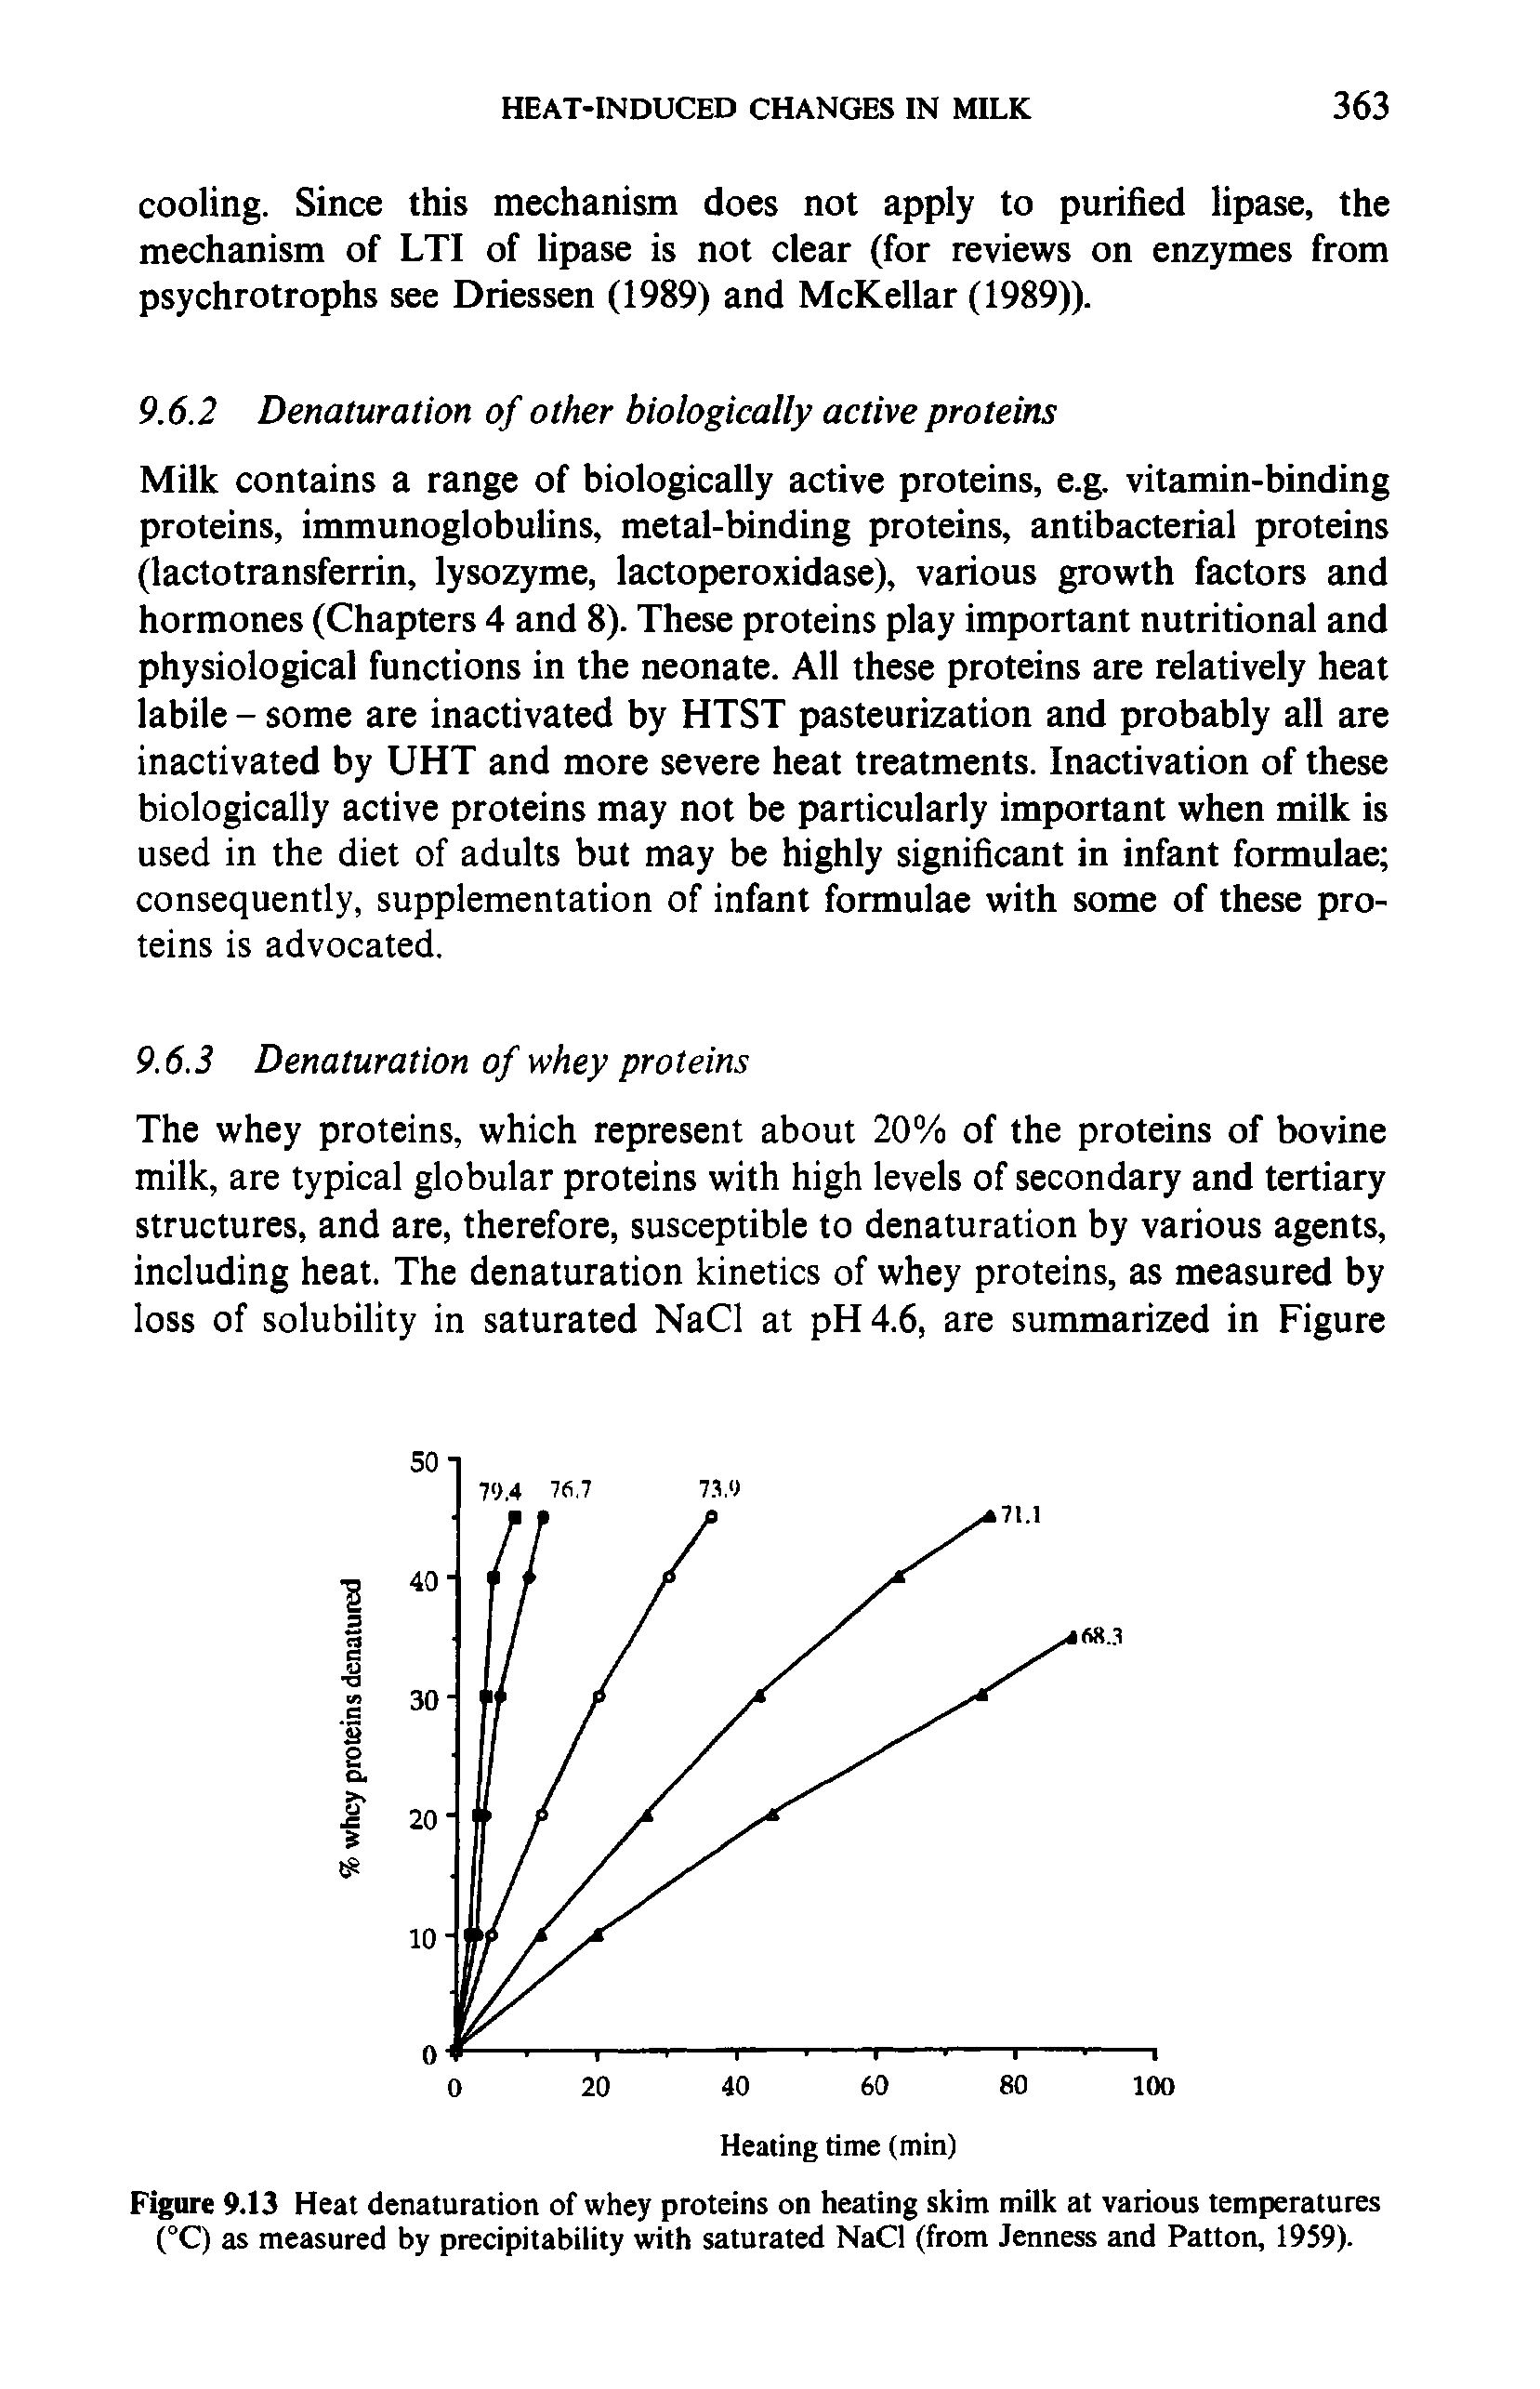 Figure 9.13 Heat denaturation of whey proteins on heating skim milk at various temperatures (°C) as measured by precipitability with saturated NaCl (from Jenness and Patton, 1959).